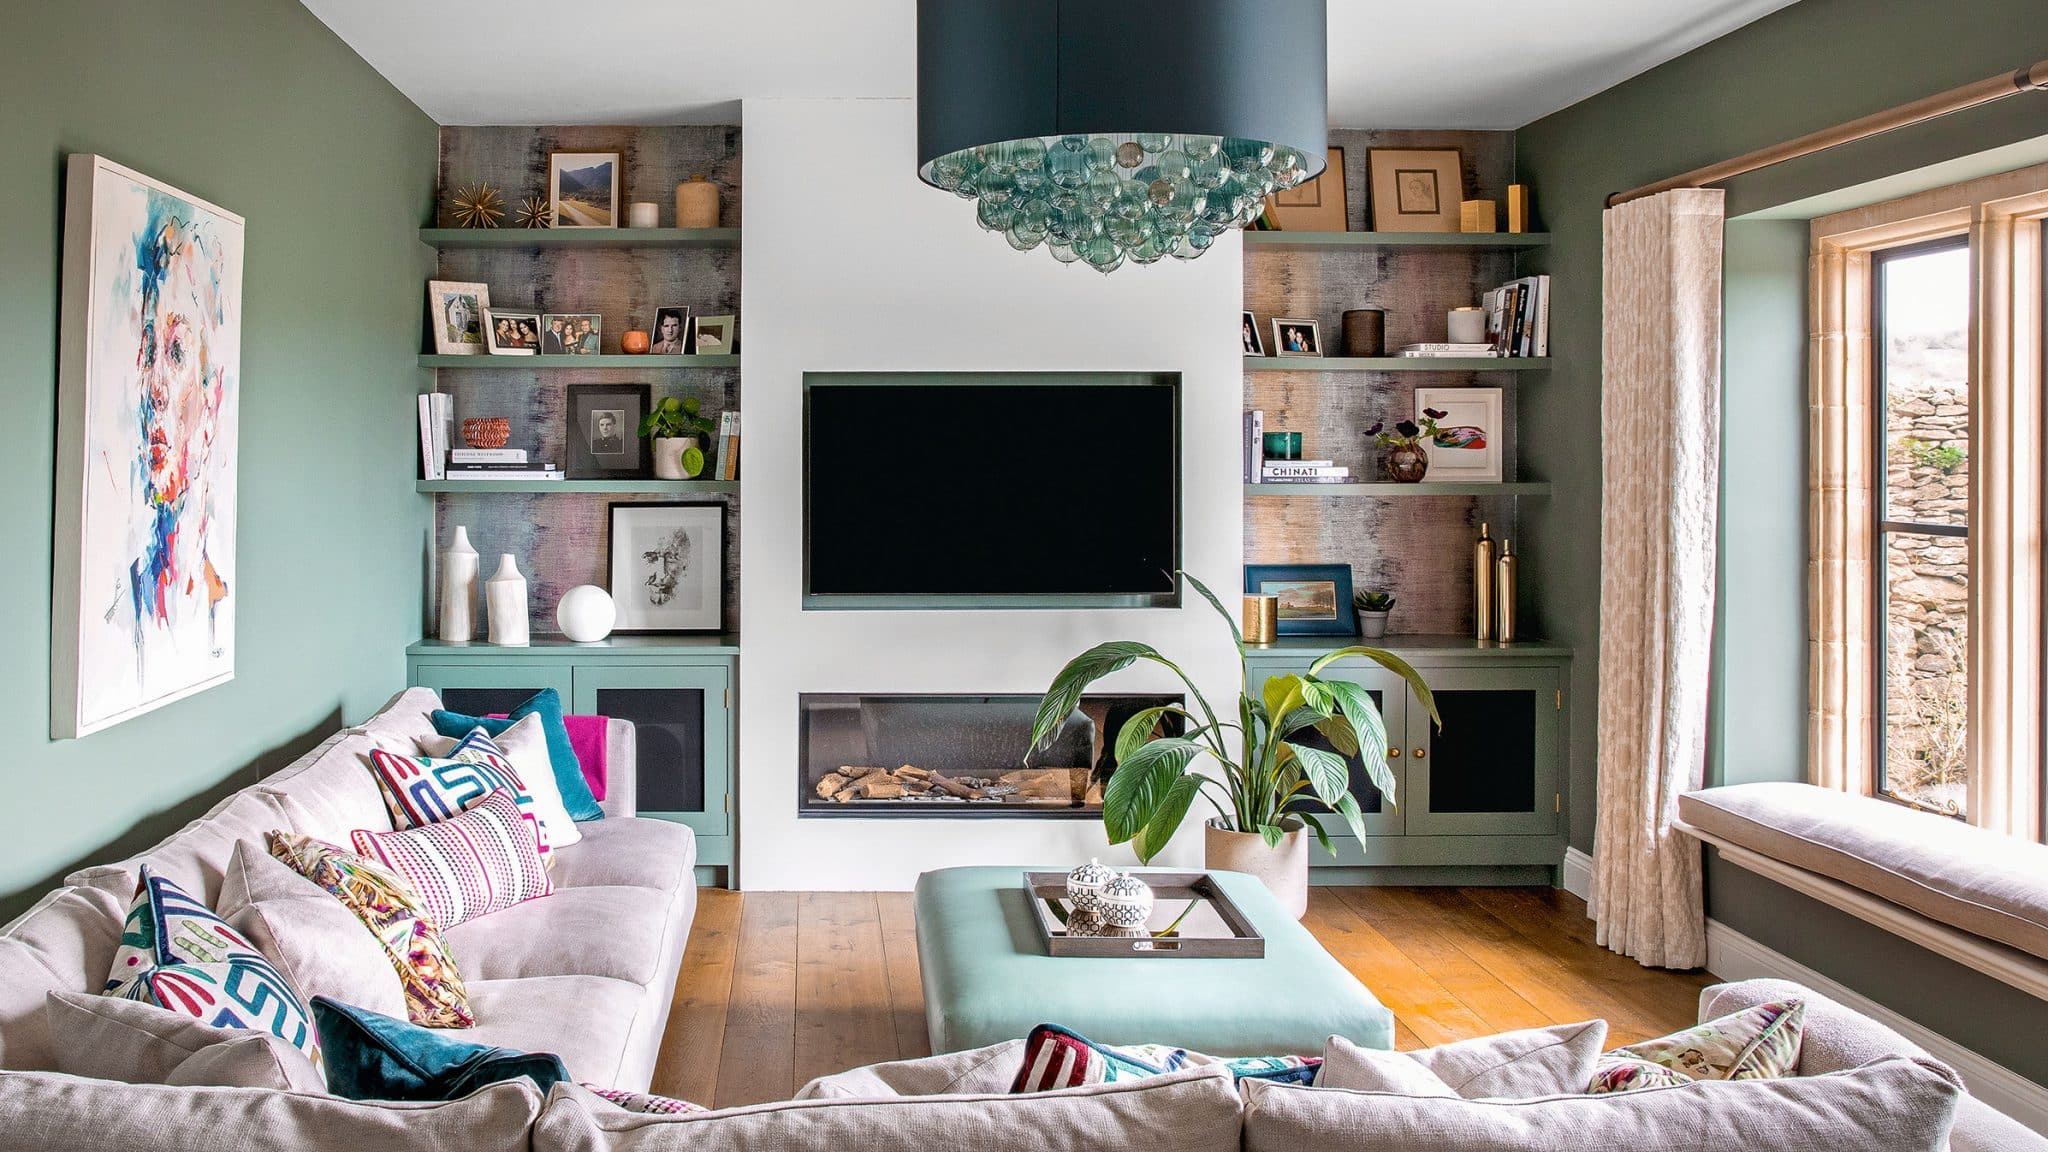 5 Clever Ways to Make Your TV Blend with the Living Room Décor